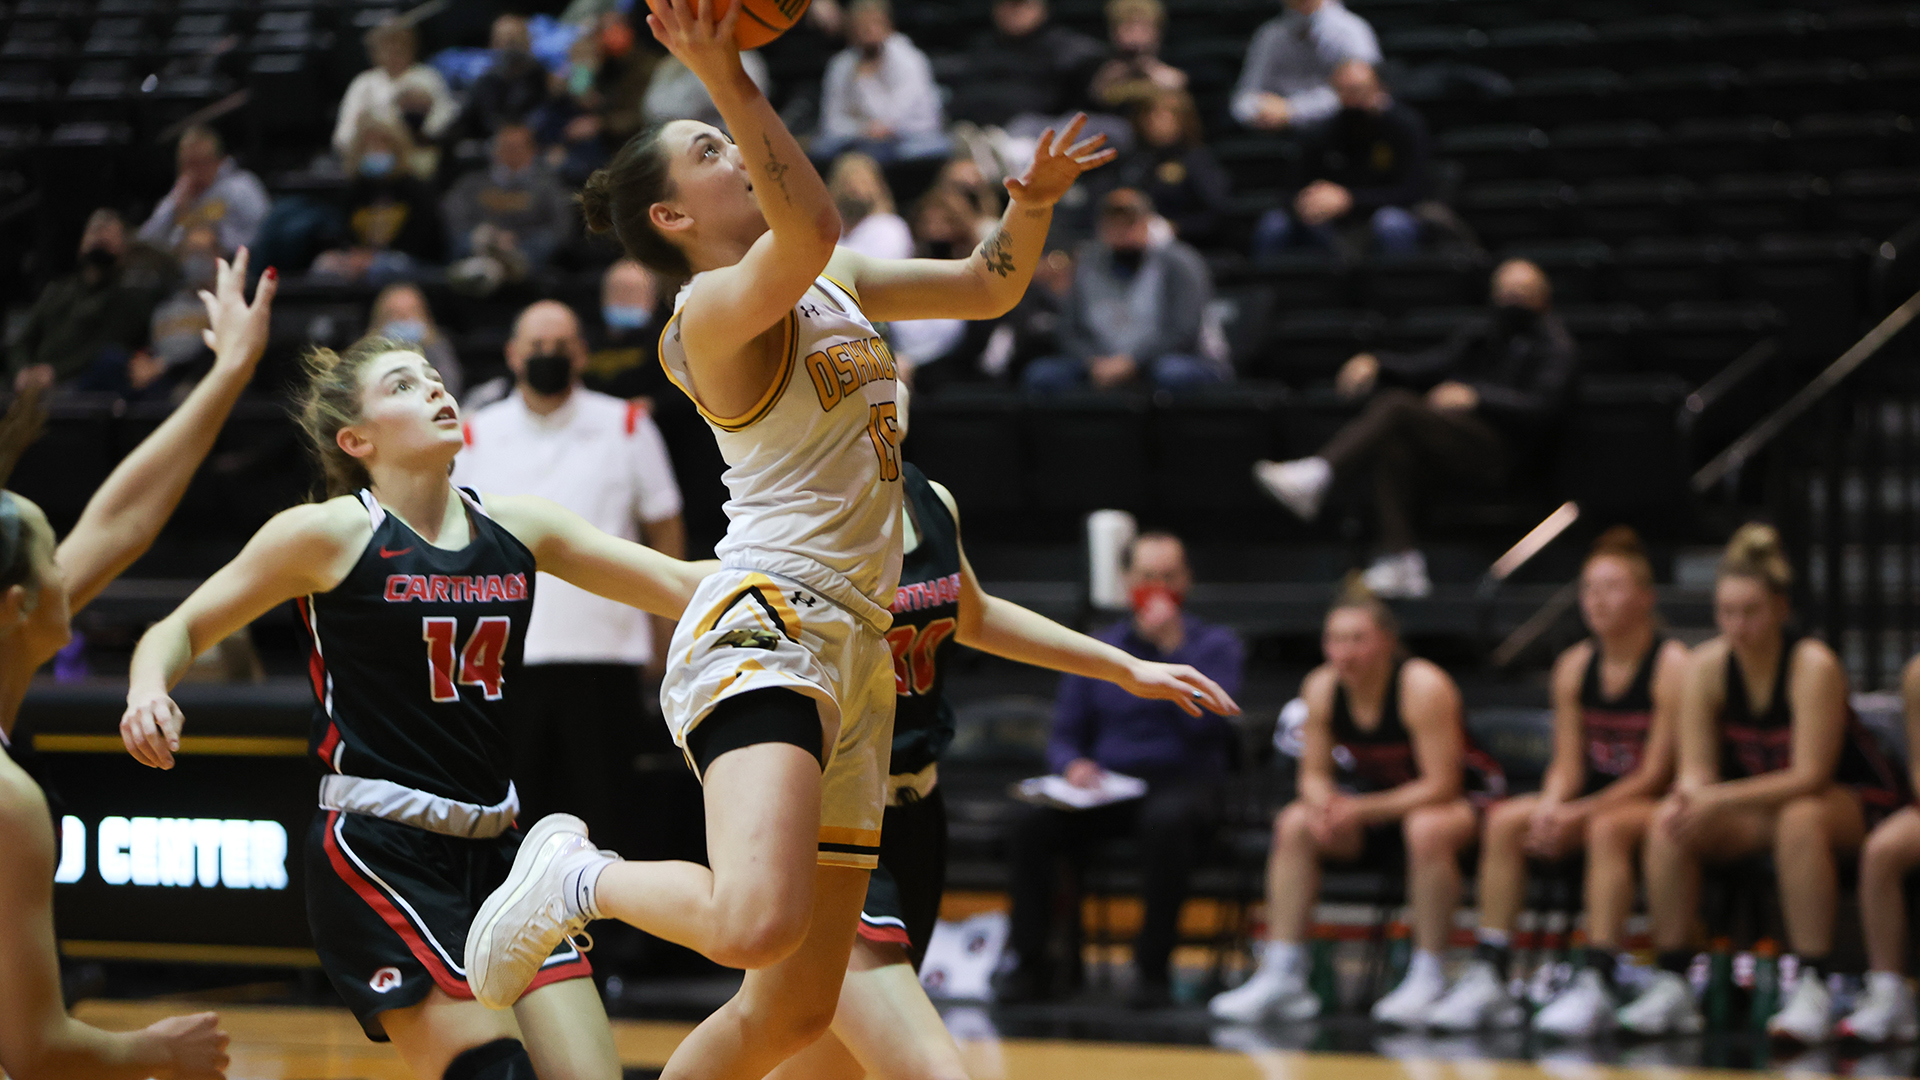 Kennedy Osterman scored eight points with a pair of rebounds against the Firebirds.